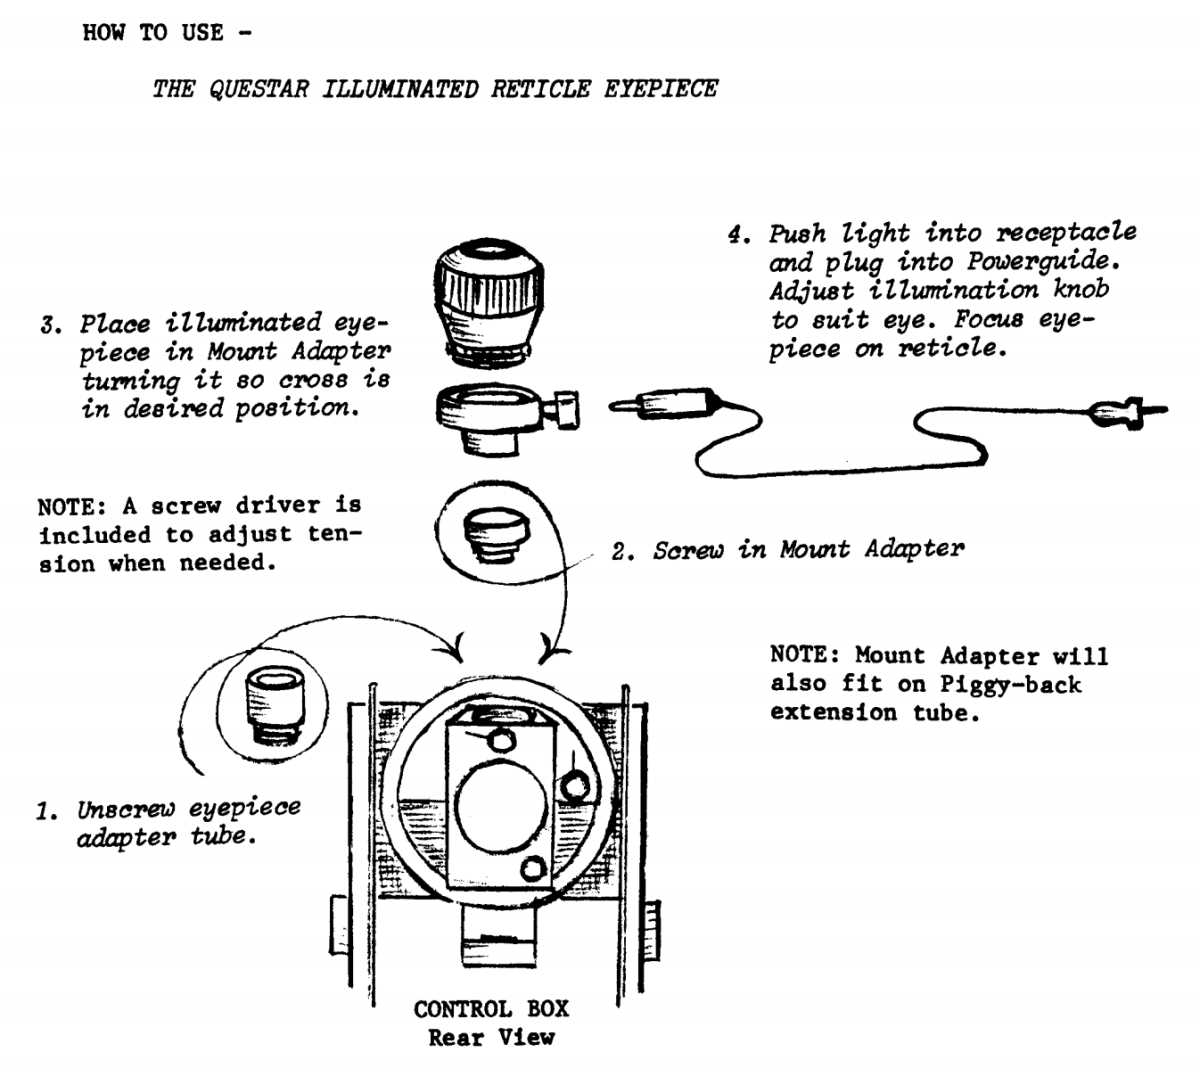 Instructions on how to use the illuminated crosshair reticle eyepiece